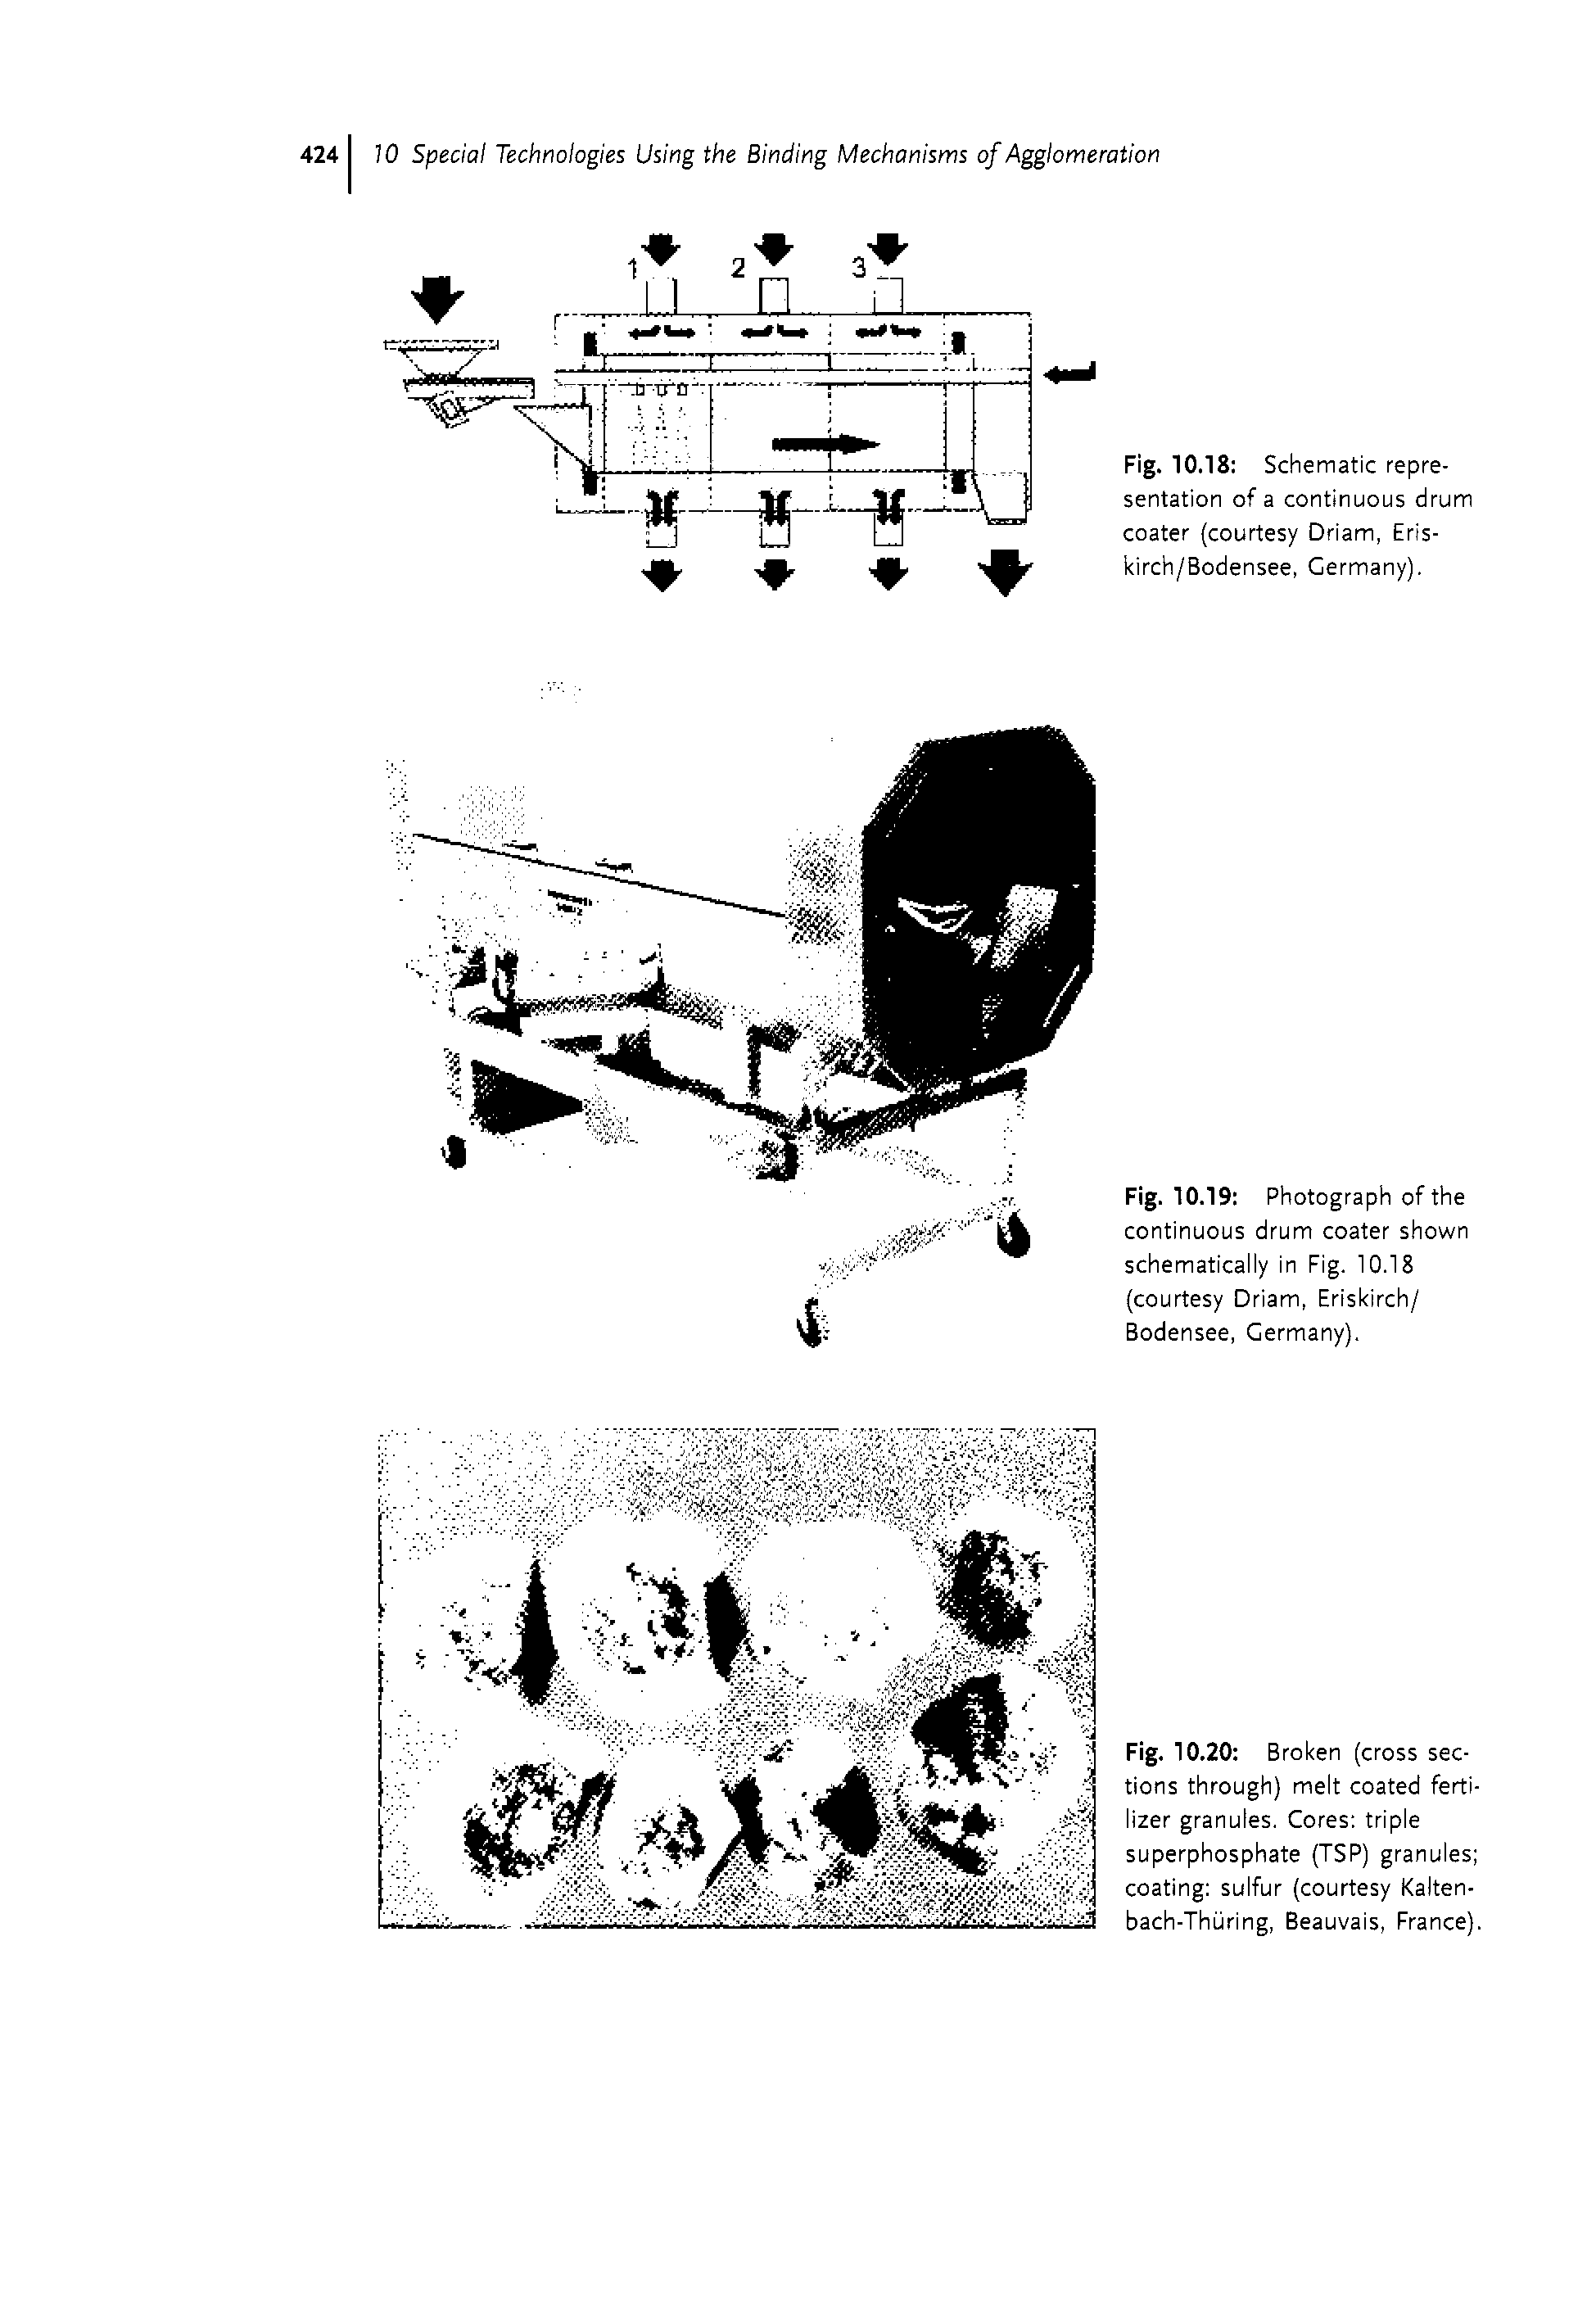 Fig. 10.20 Broken (cross sections through) melt coated fertilizer granules. Cores triple superphosphate (TSP) granules coating sulfur (courtesy Kalten-bach-Thuring, Beauvais, France).